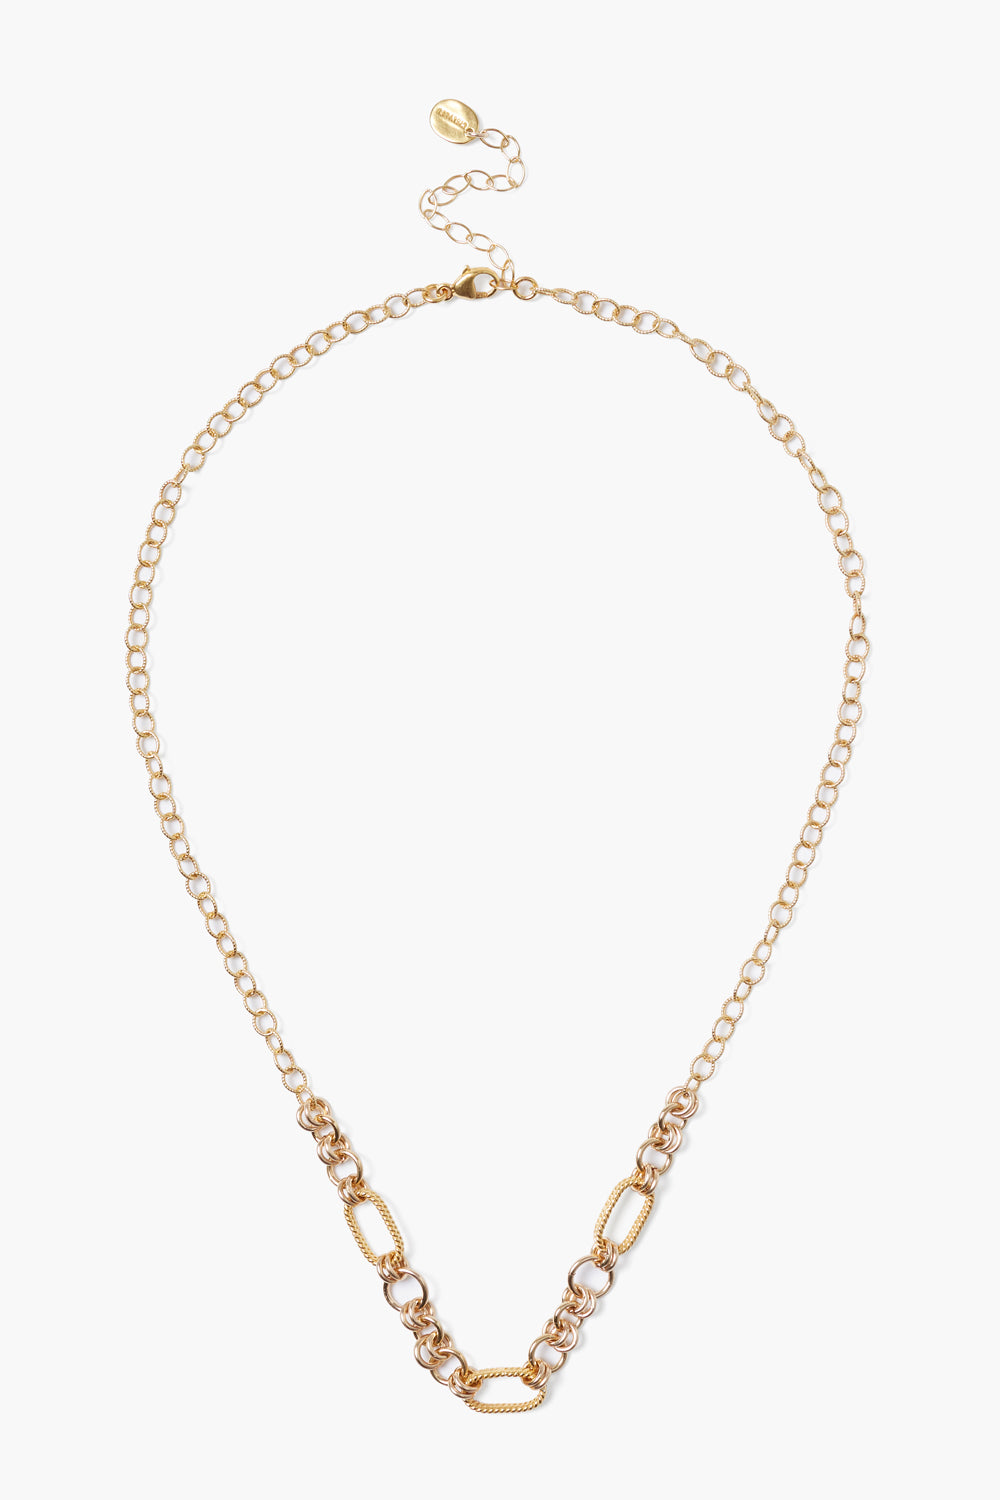 YELLOW GOLD TEXTURED LINKS NECKLACE